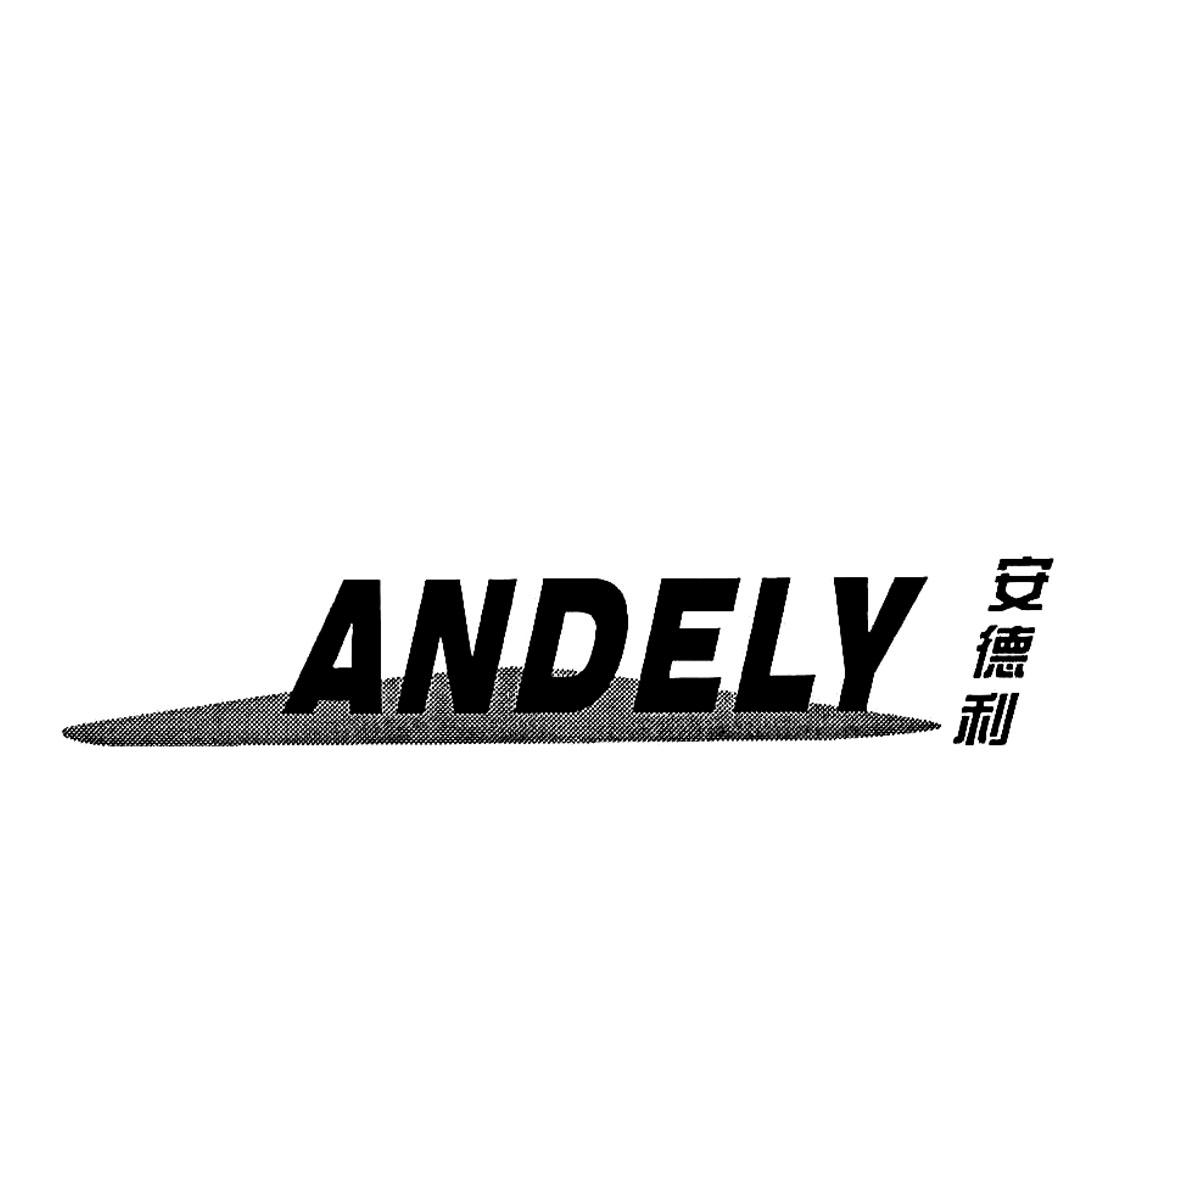  ANDELY